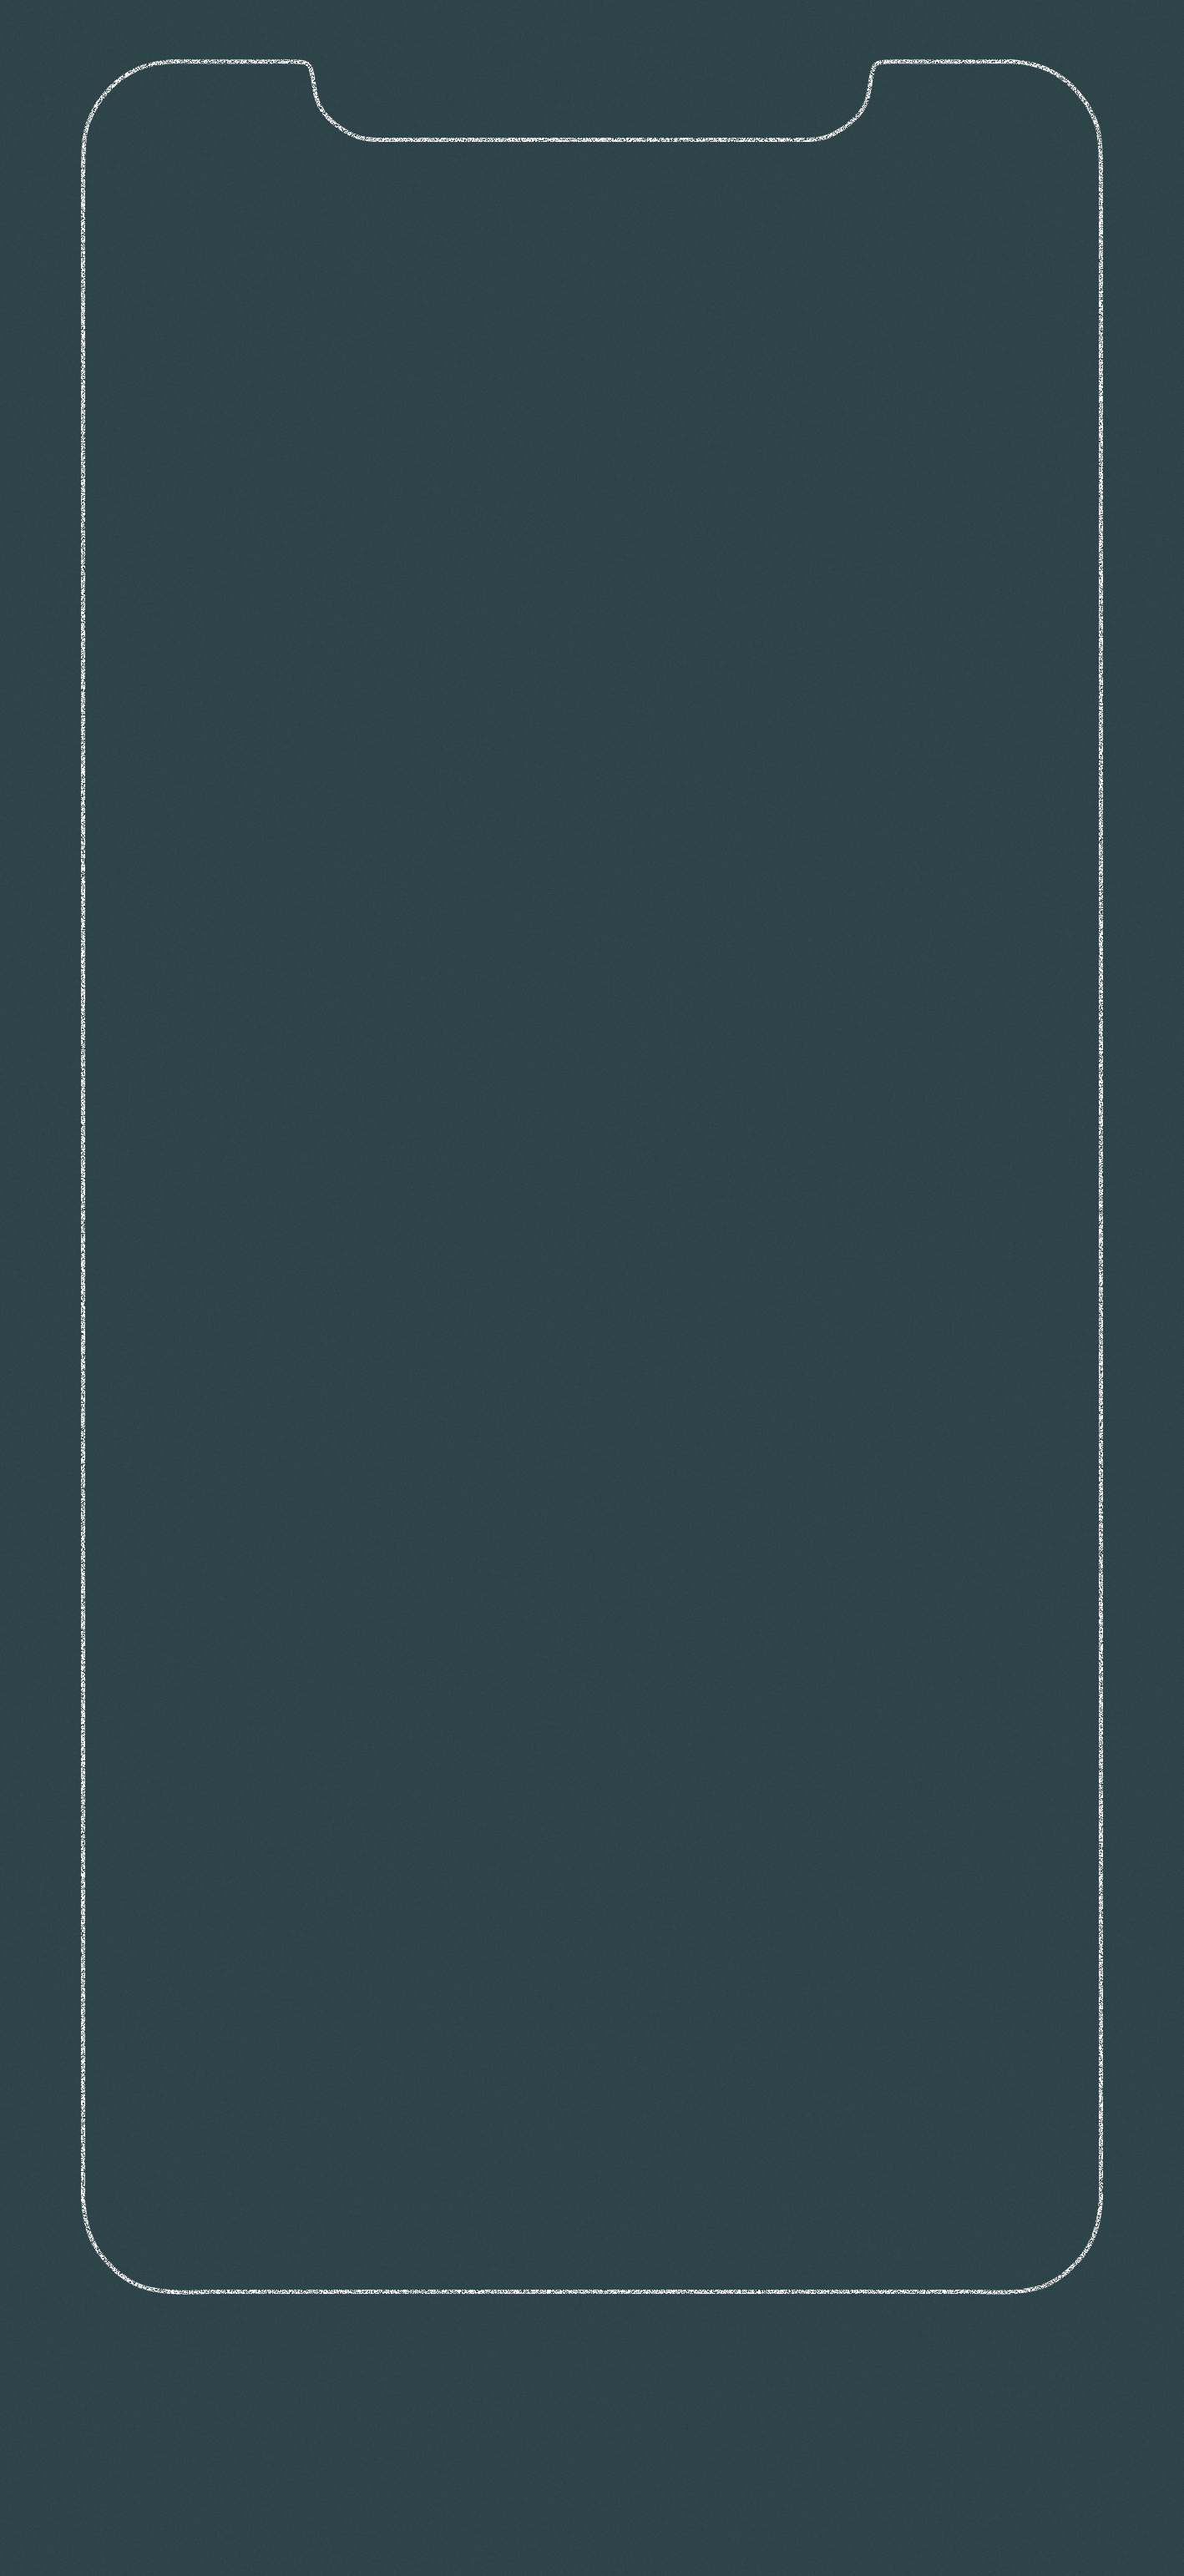 iPhone XS Max Outline Wallpaper. iPhone wallpaper image, iPhone homescreen wallpaper, Apple wallpaper iphone